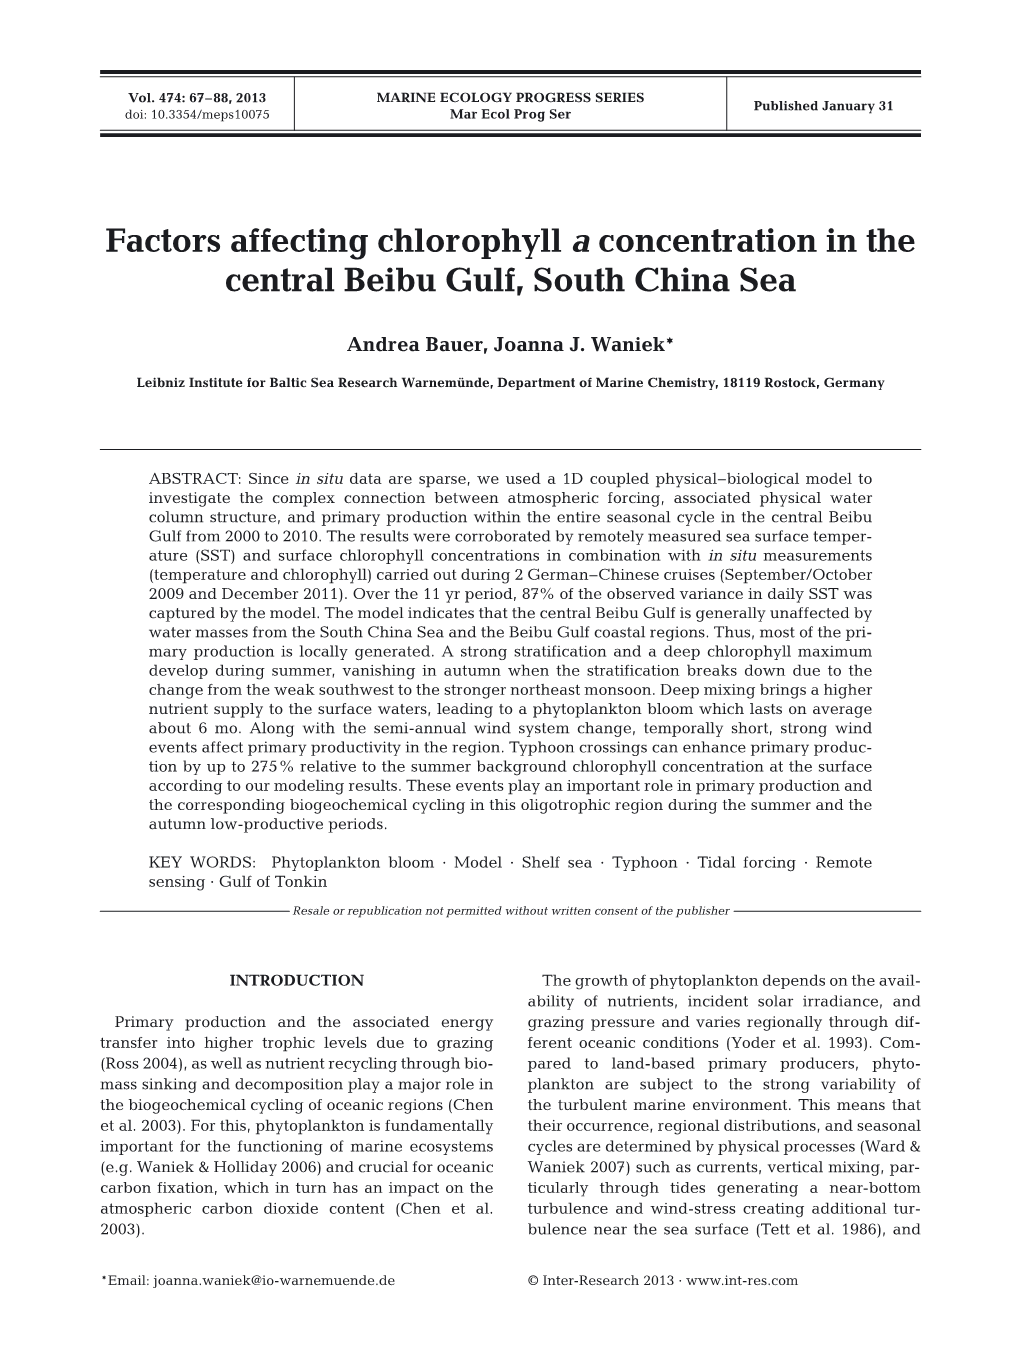 Factors Affecting Chlorophyll a Concentration in the Central Beibu Gulf, South China Sea